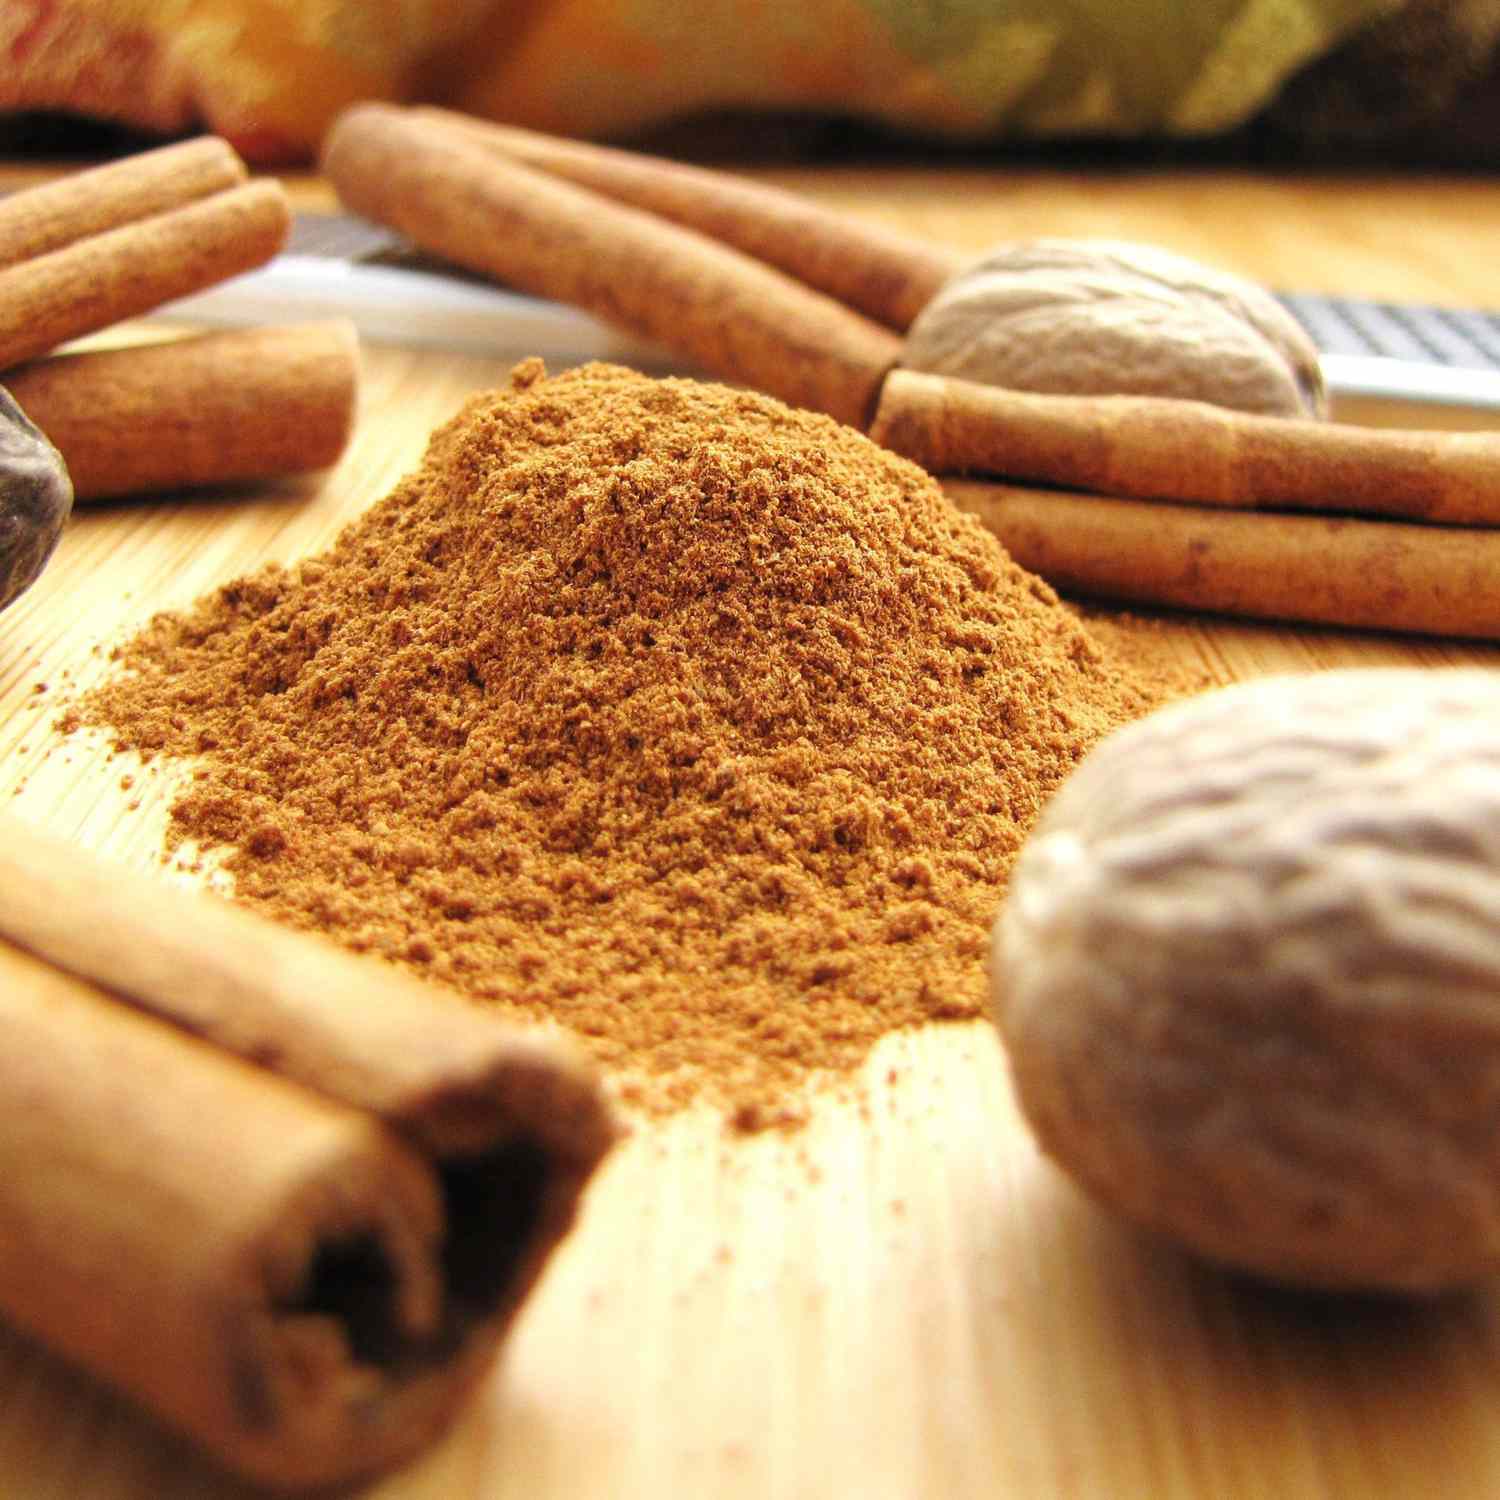 side view closeup of a mound of ground spices on a cutting board surrounded by whole nutmegs and cinnamon sticks, with a microplane in the background